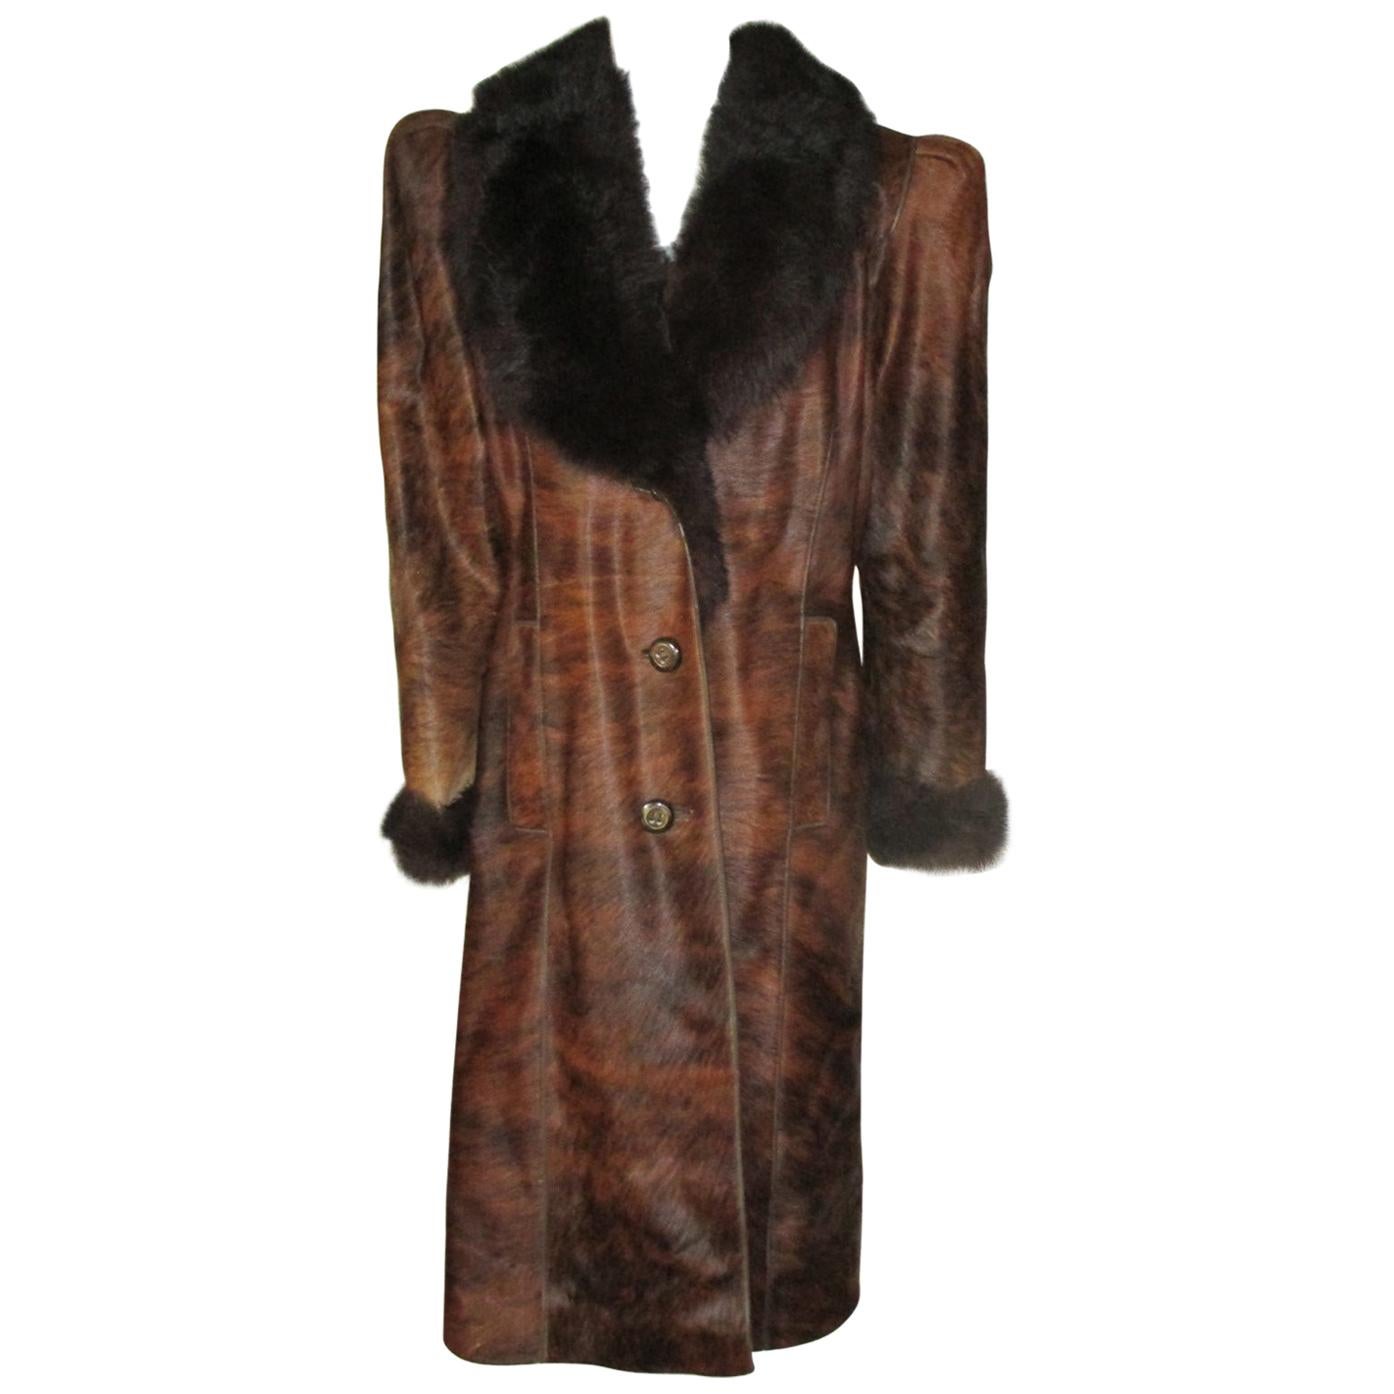  Unique Brown Pony Skin or Cowhide Leather Fur Coat For Sale